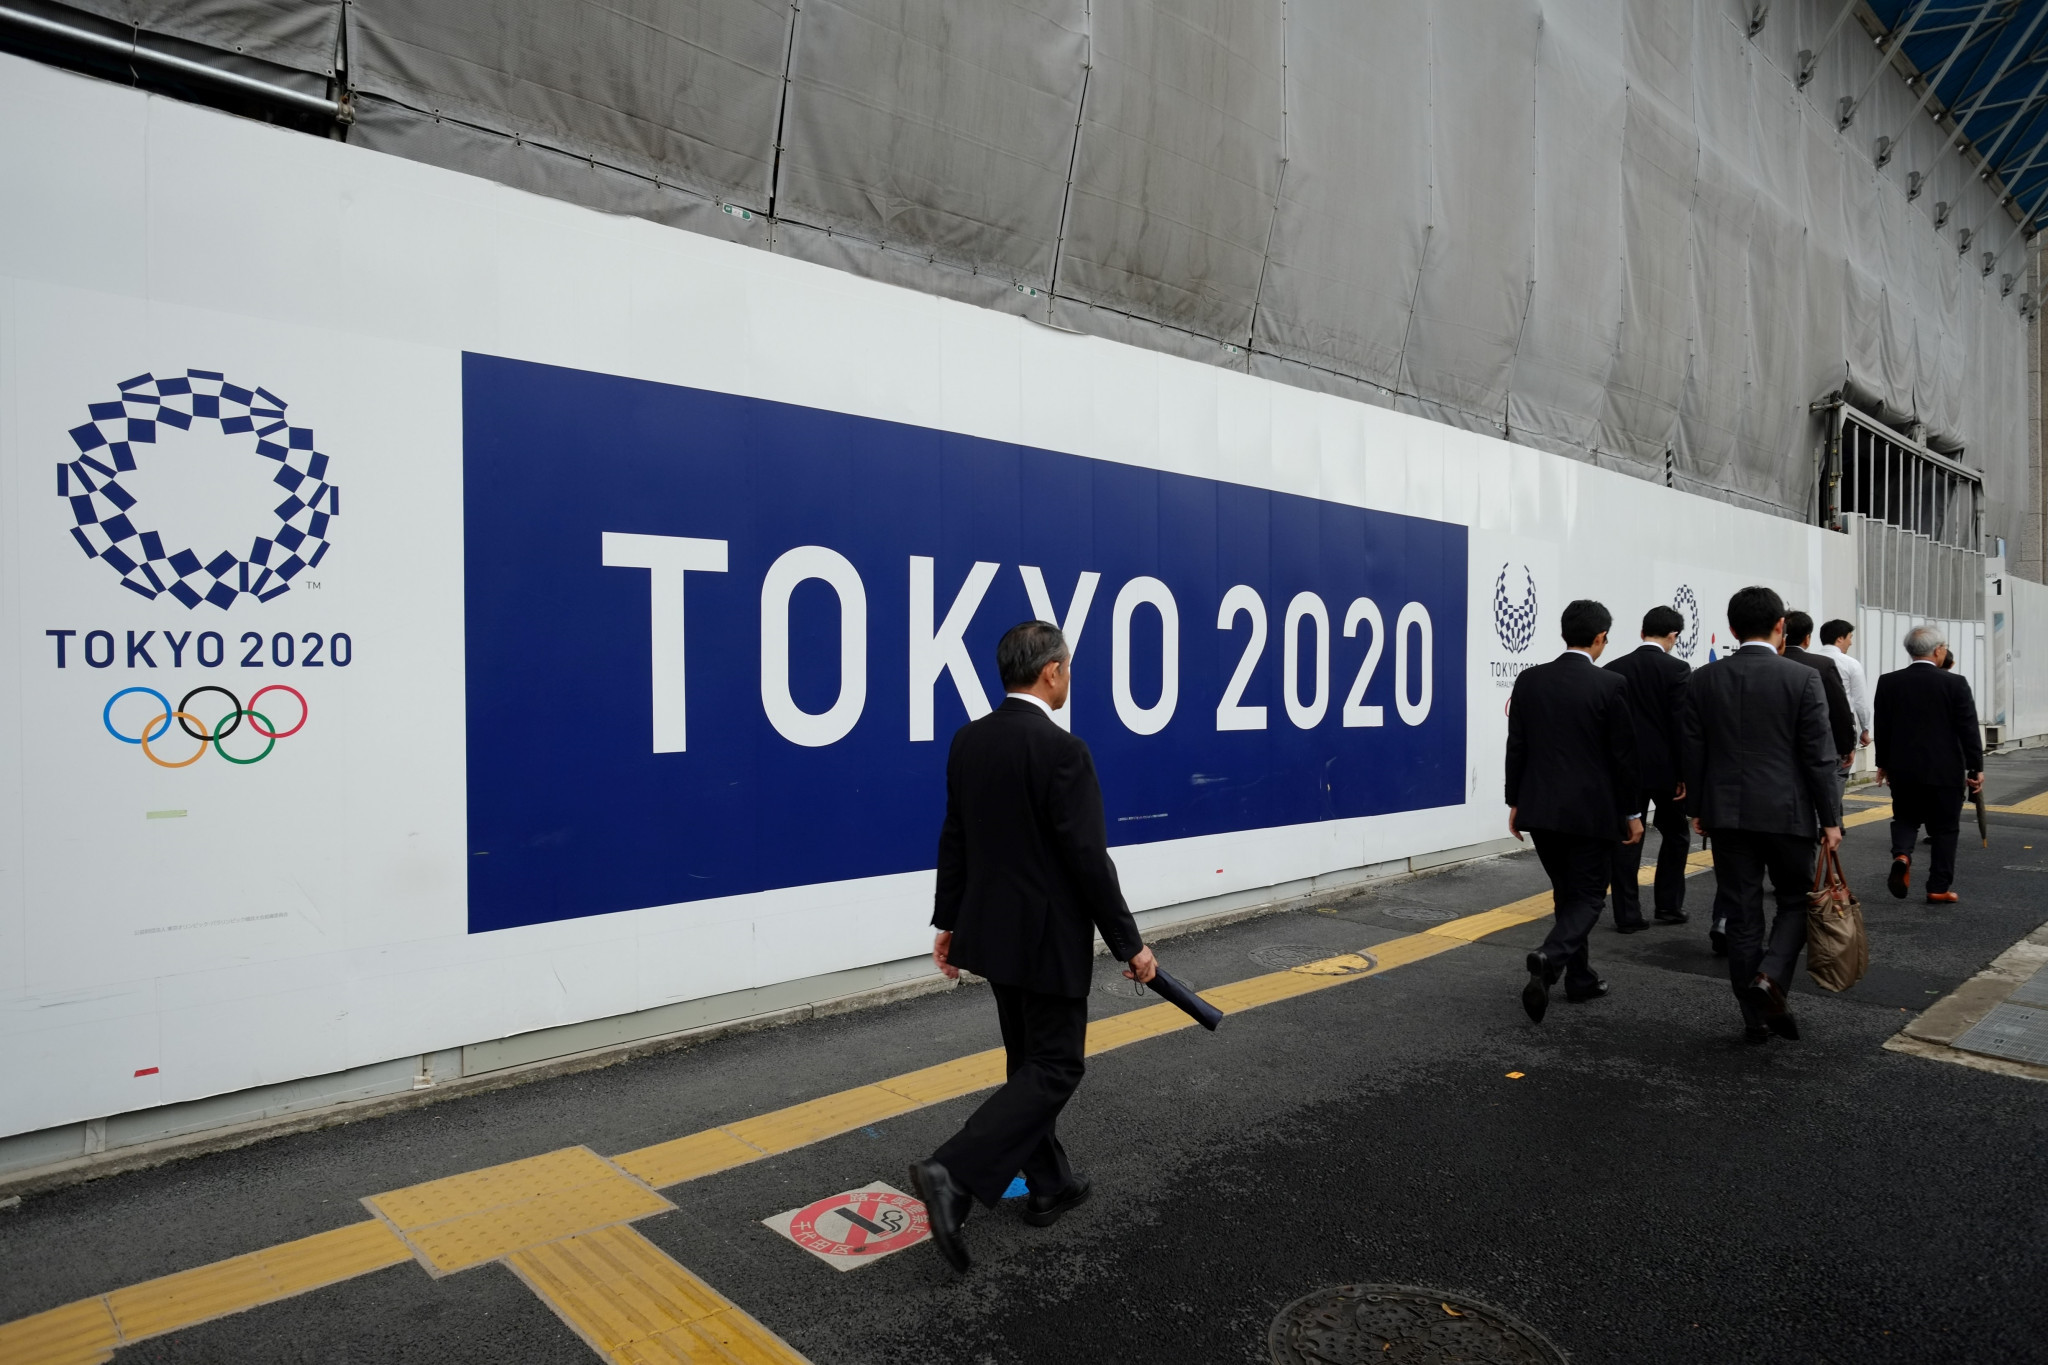 Tokyo 2020 will be boosted by a law prohibiting the resale of tickets above their actual value ©Getty Images